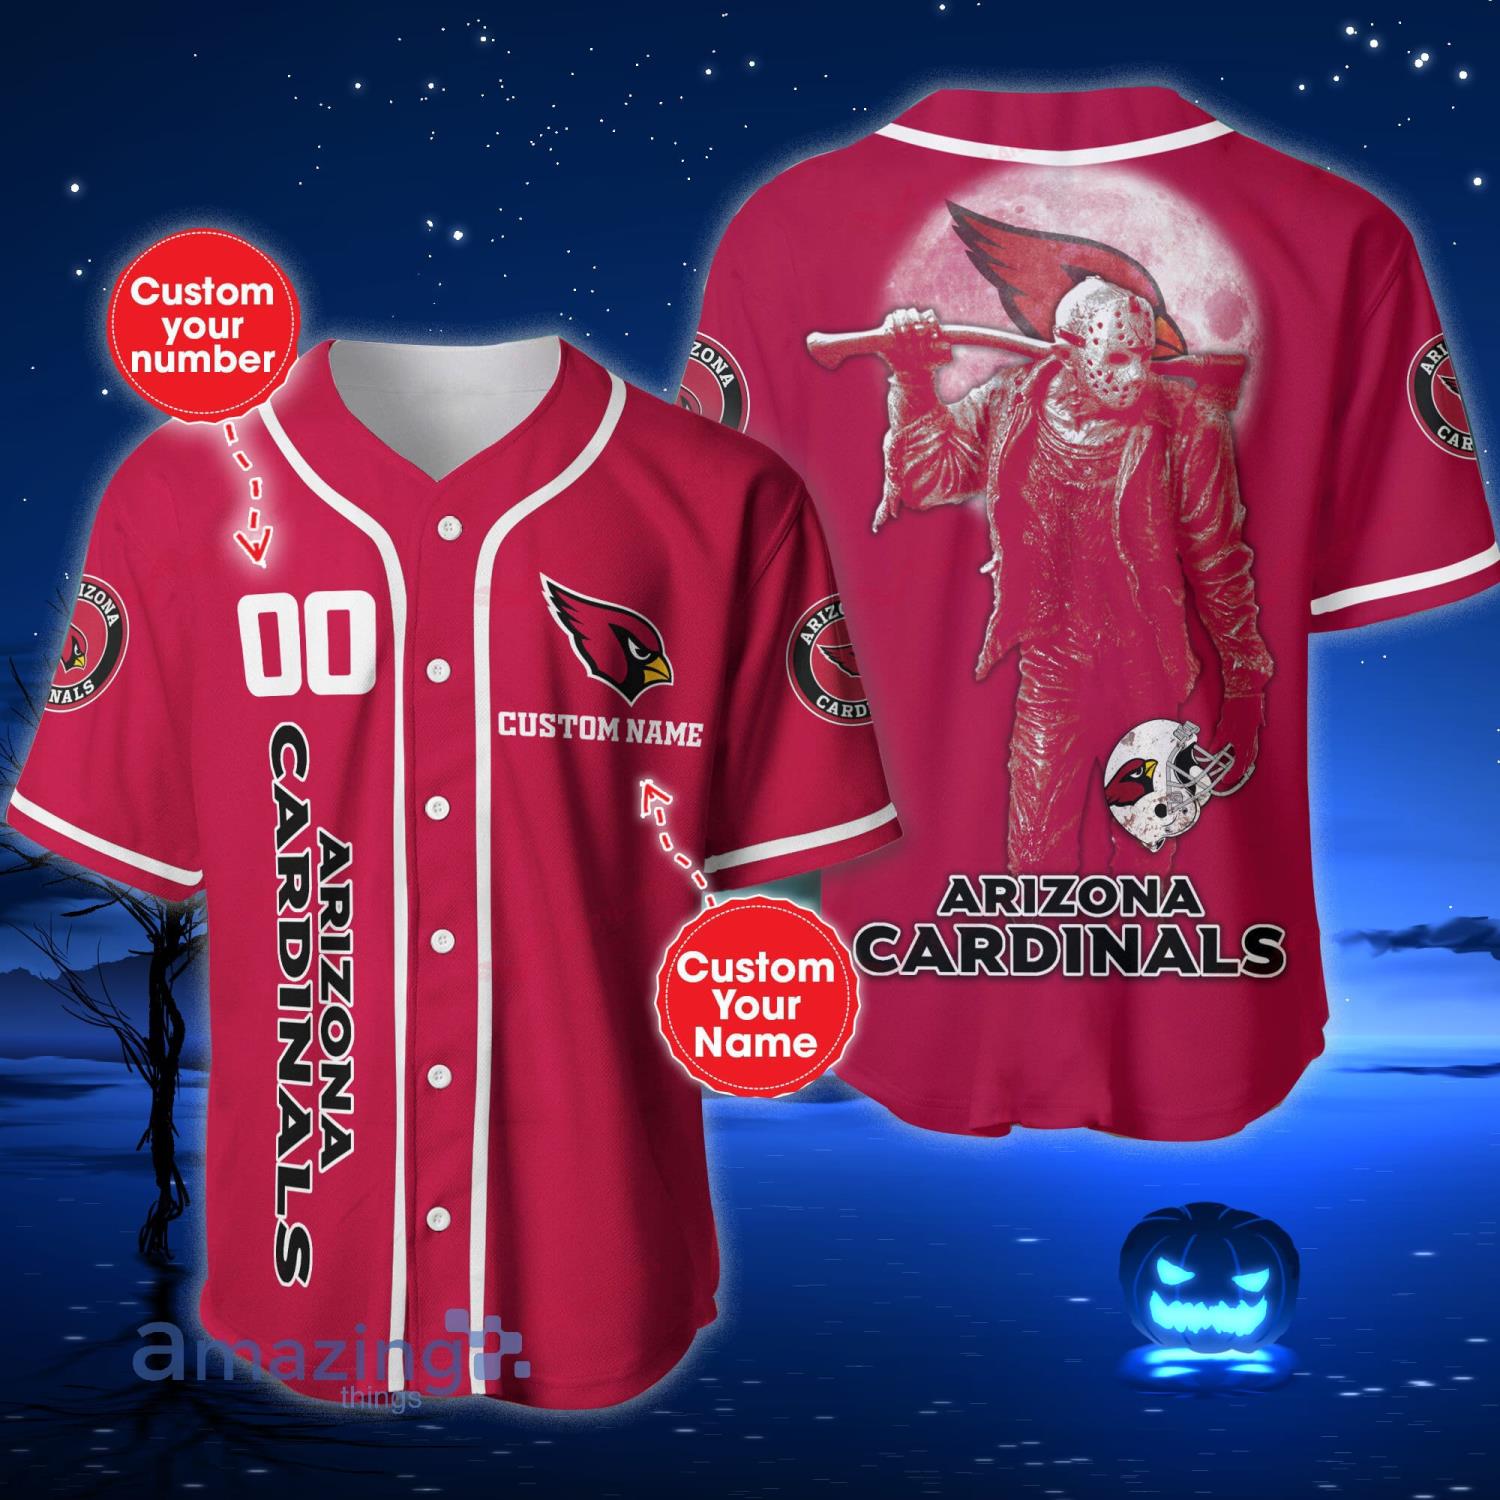 Arizona Cardinals Nfl 3d Personalized Name And Number Baseball Jersey Shirt  For Fans